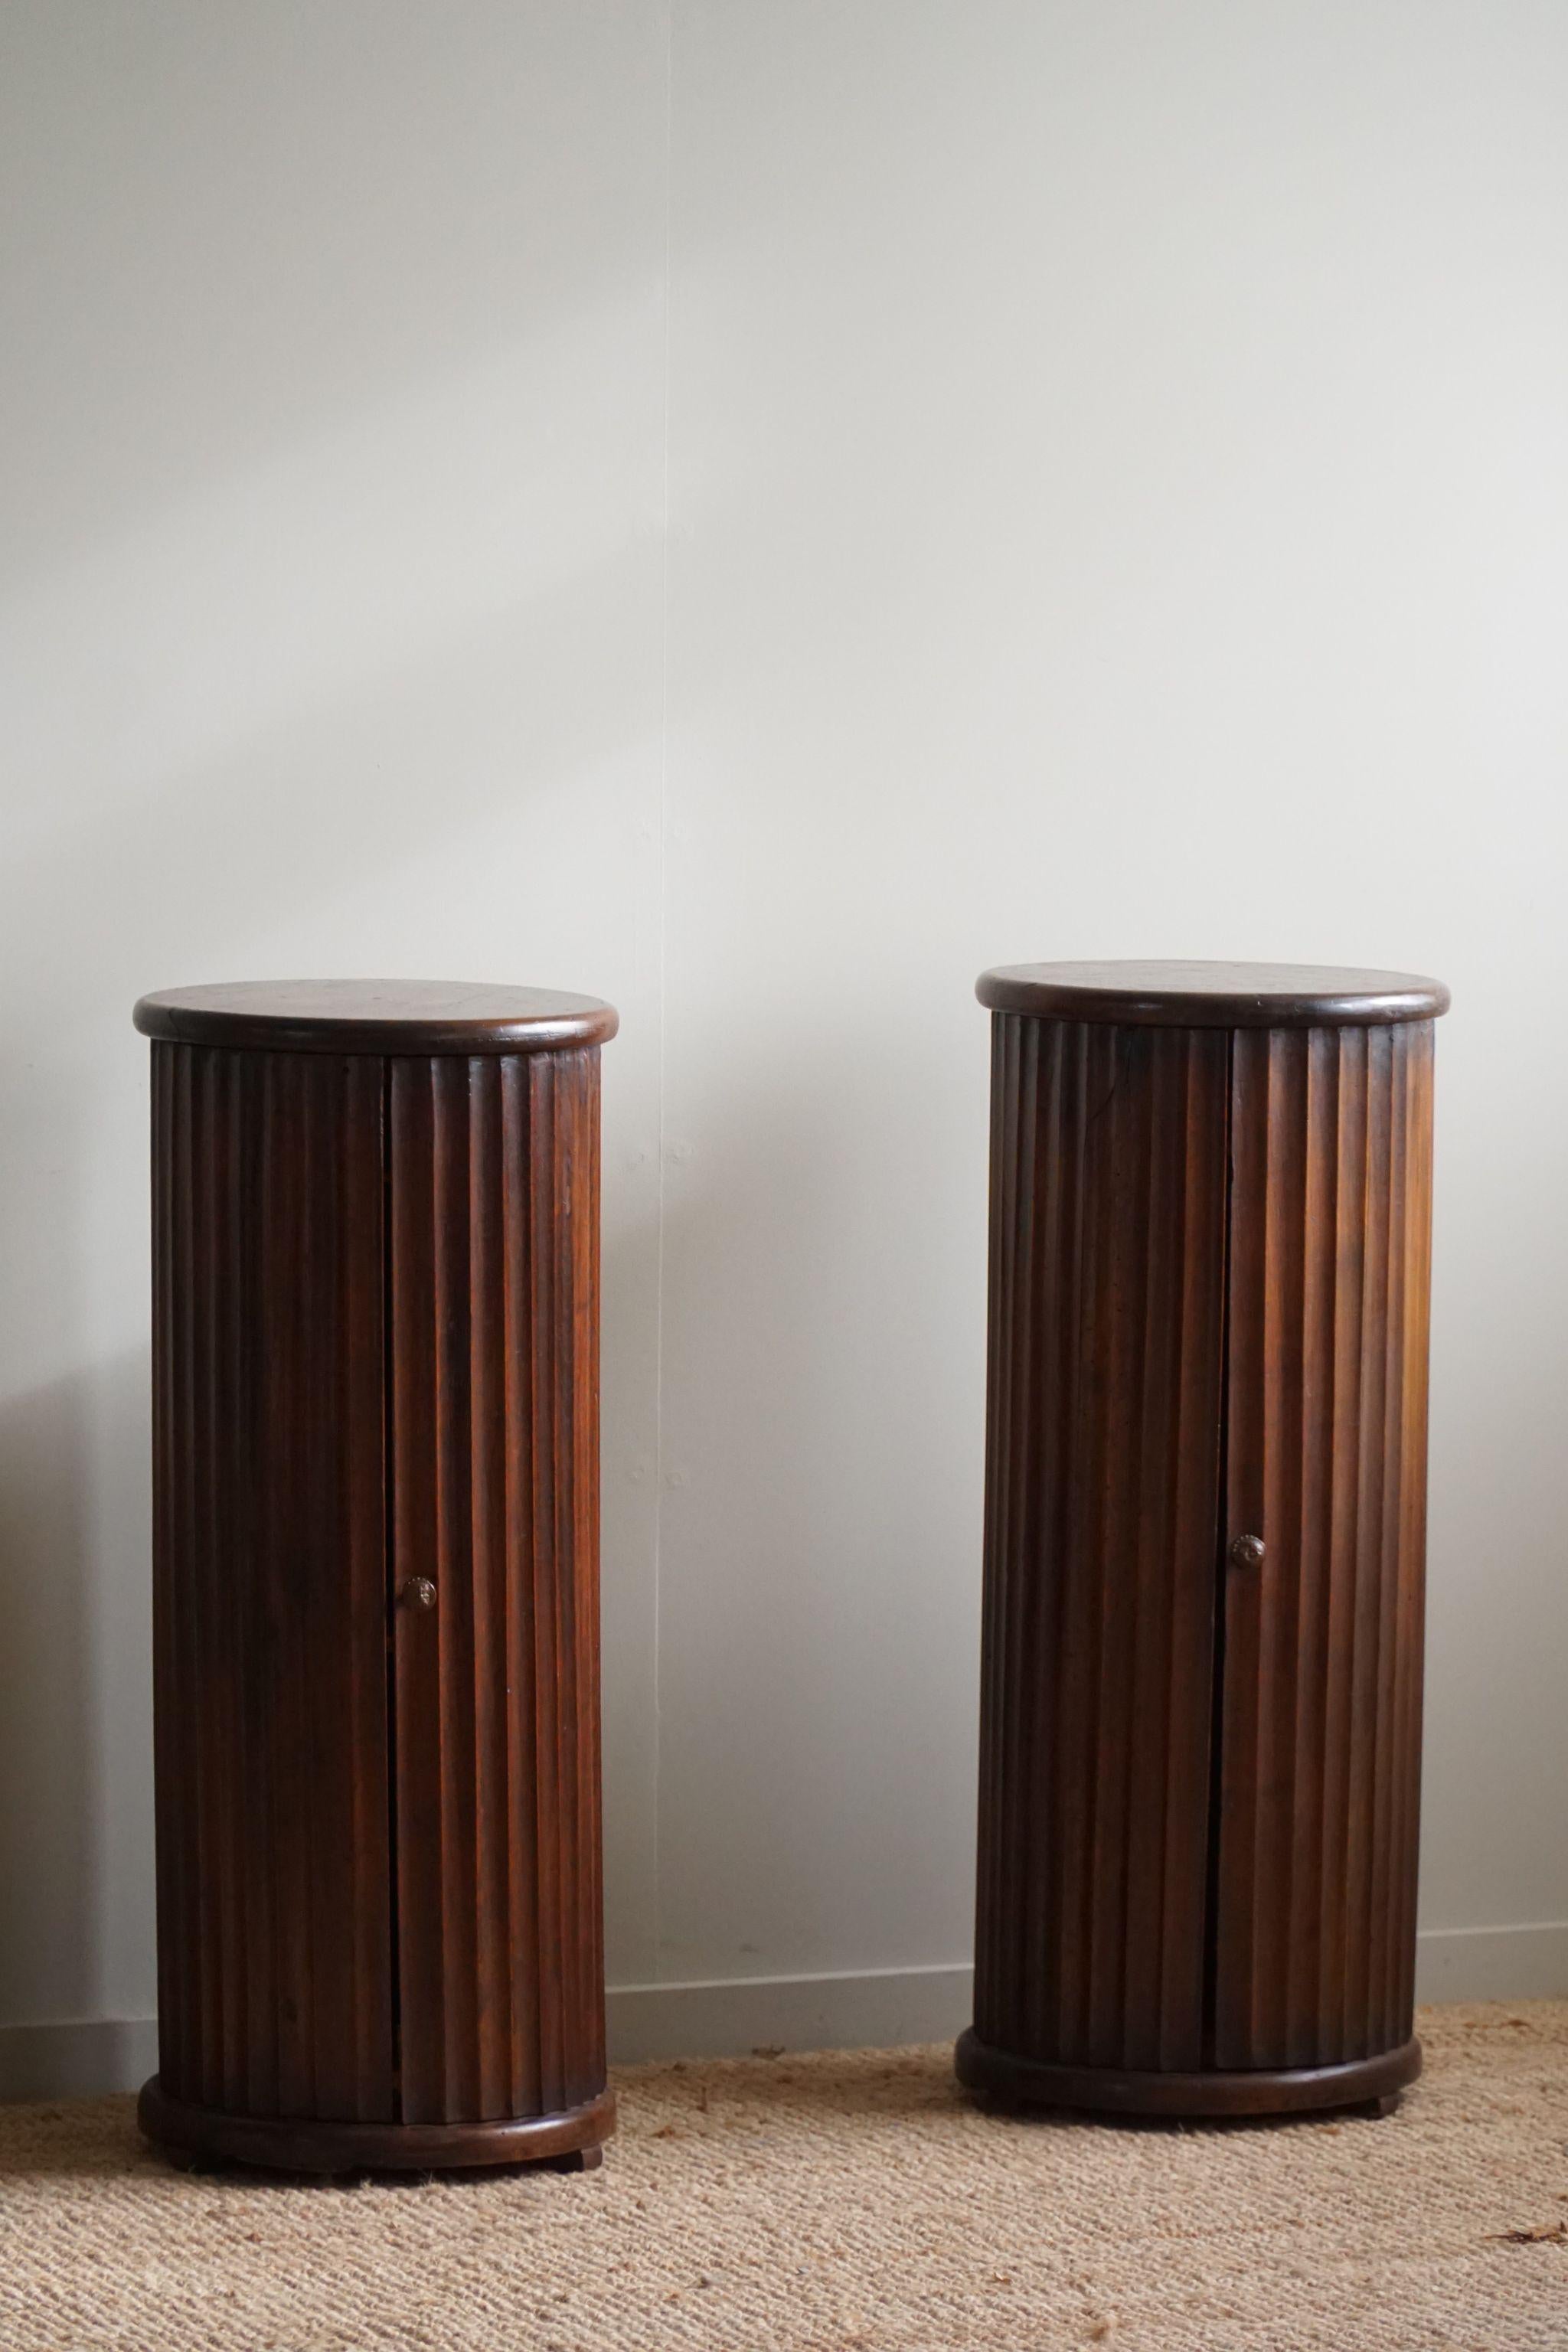 19th Century A Pair of Antique Pedestals With Storage, Nutwood, Italian Cabinetmaker, 1880s 